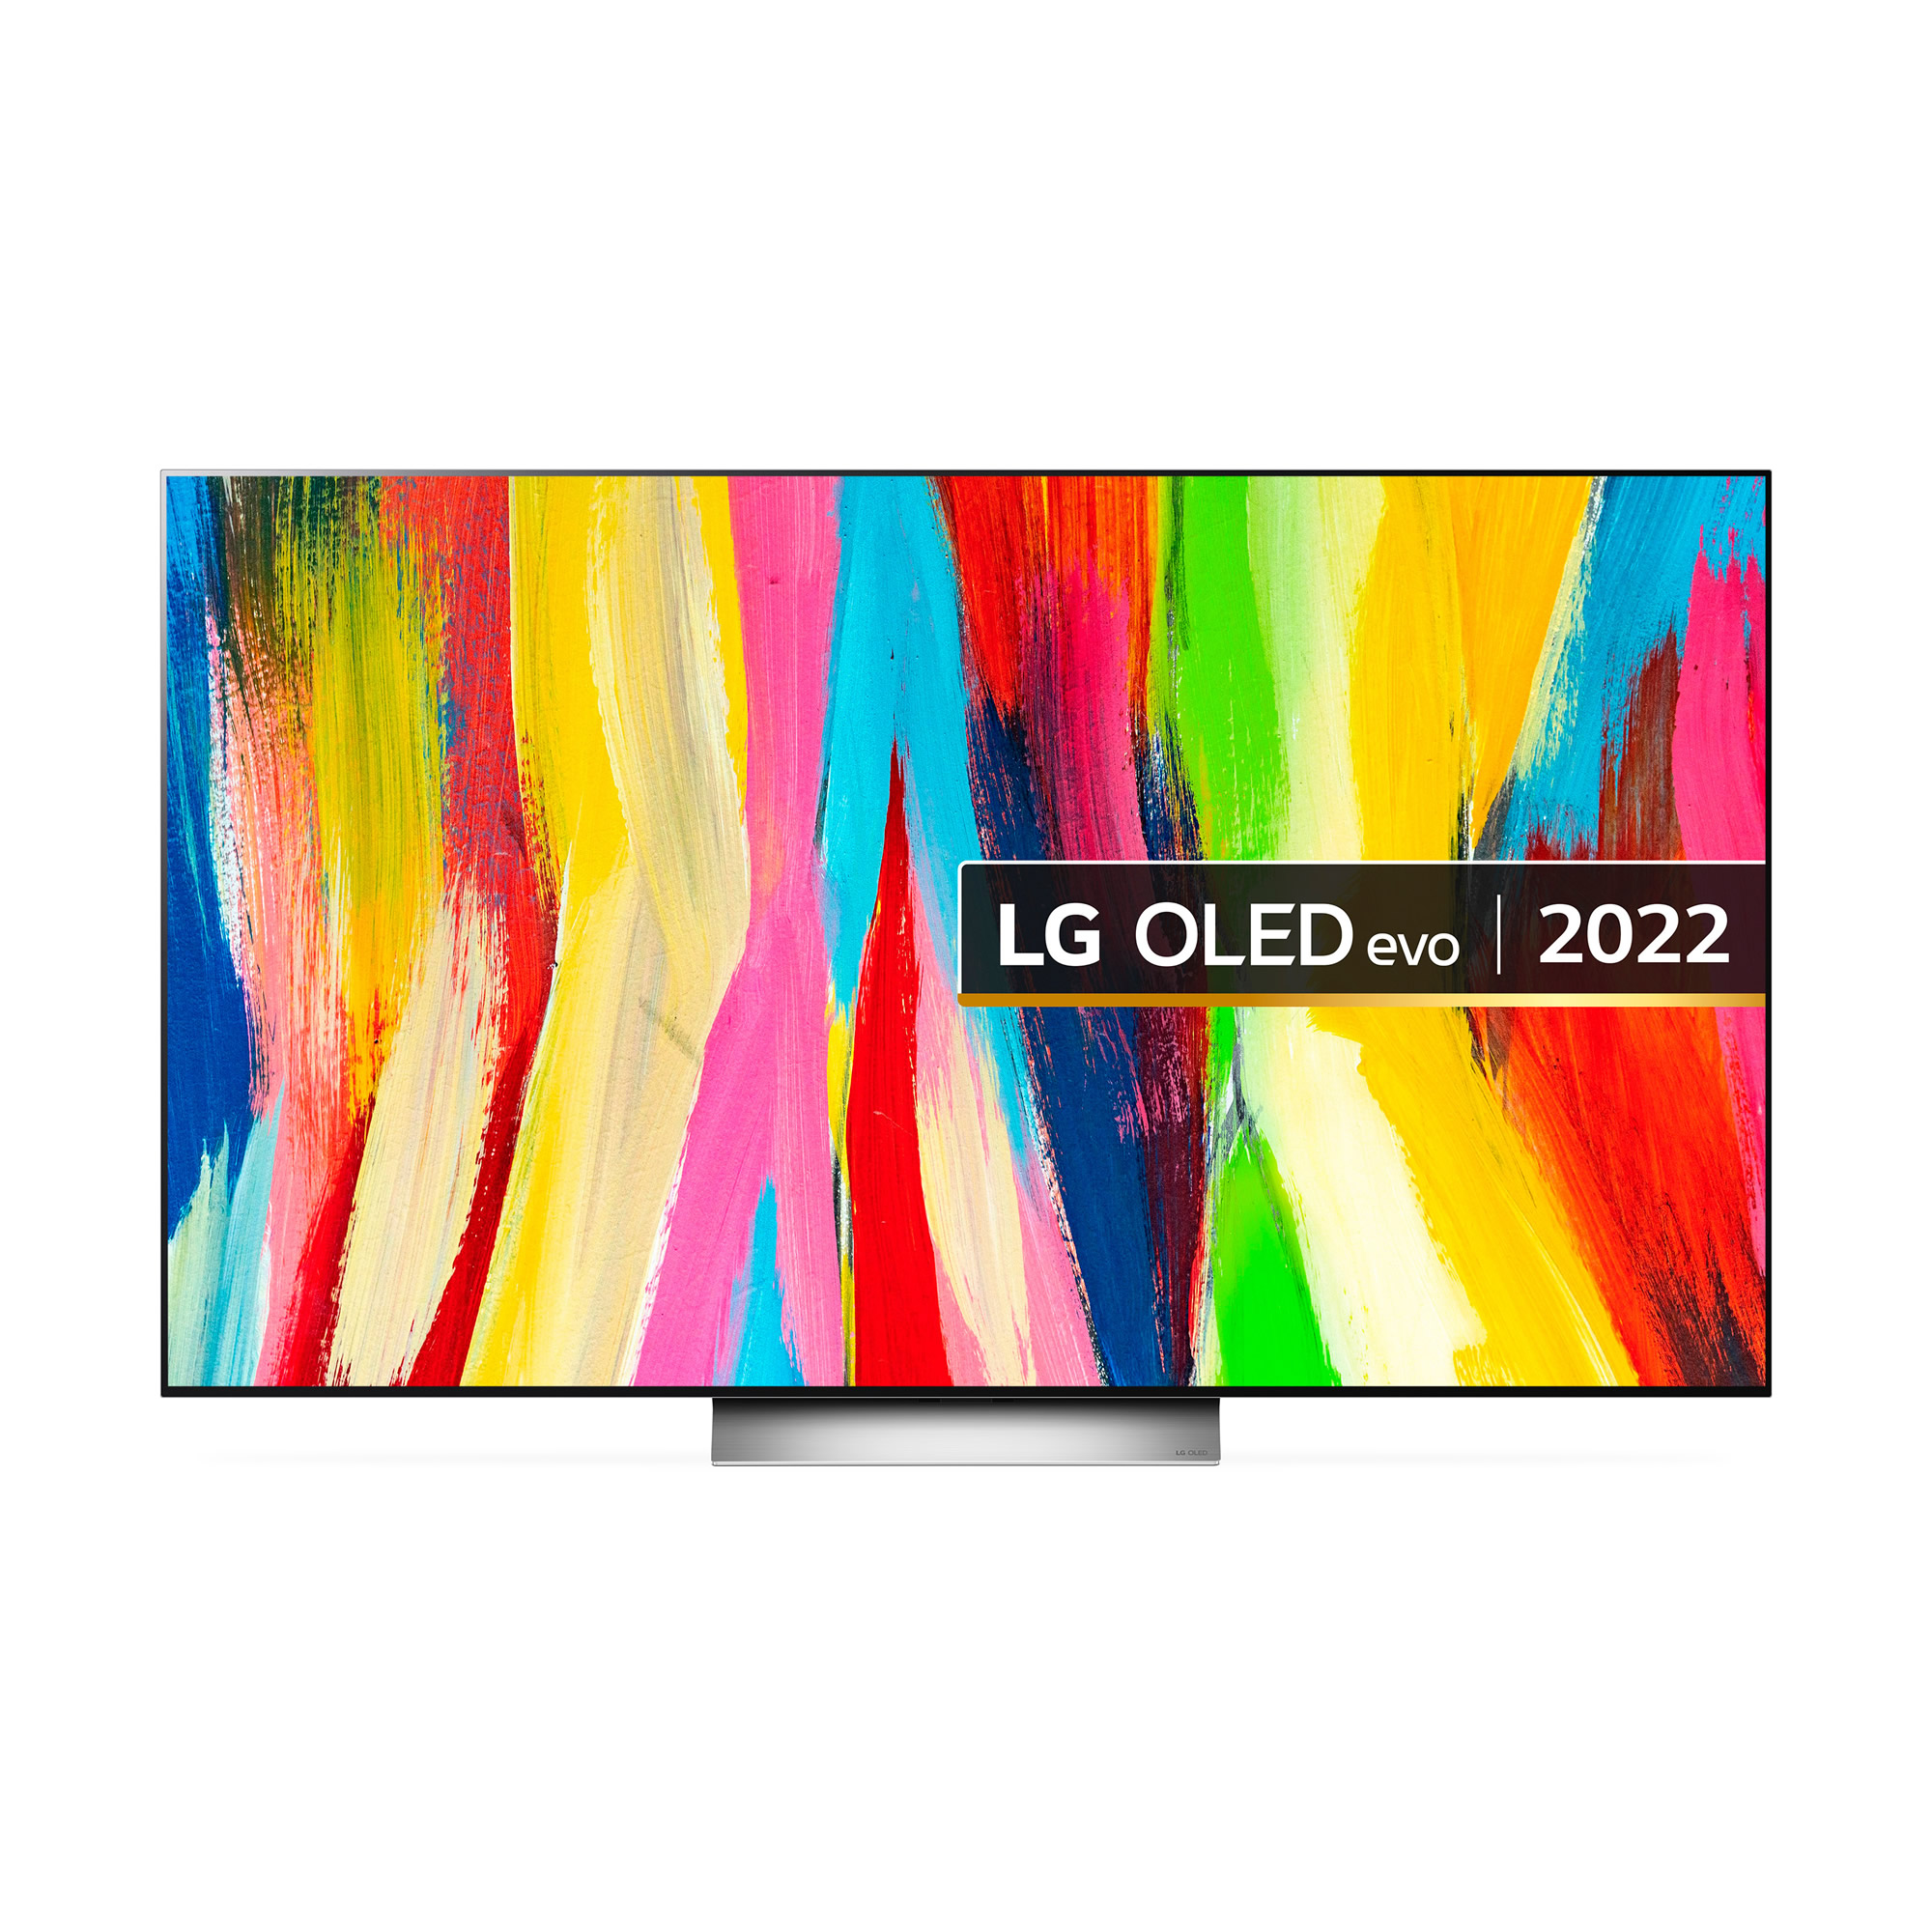 LG 65inch OLED HDR 4K UHD SMART TV WiFi Dolby Atmos